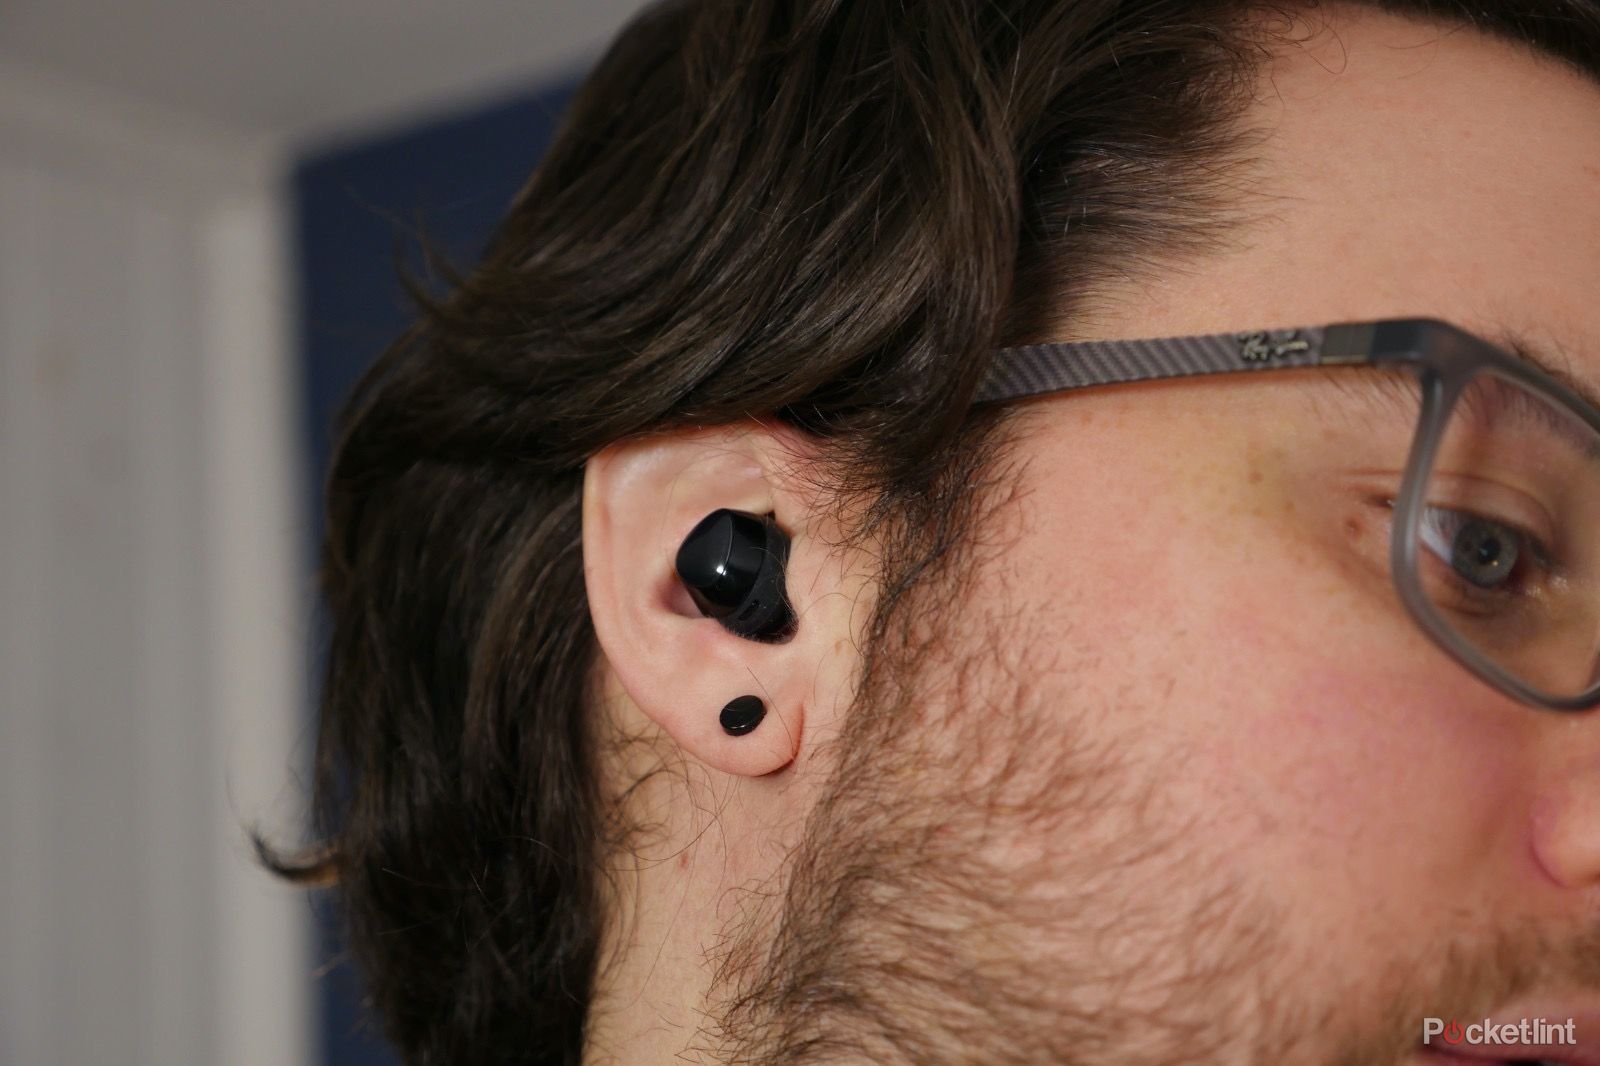 Samsung Galaxy Buds review image 1